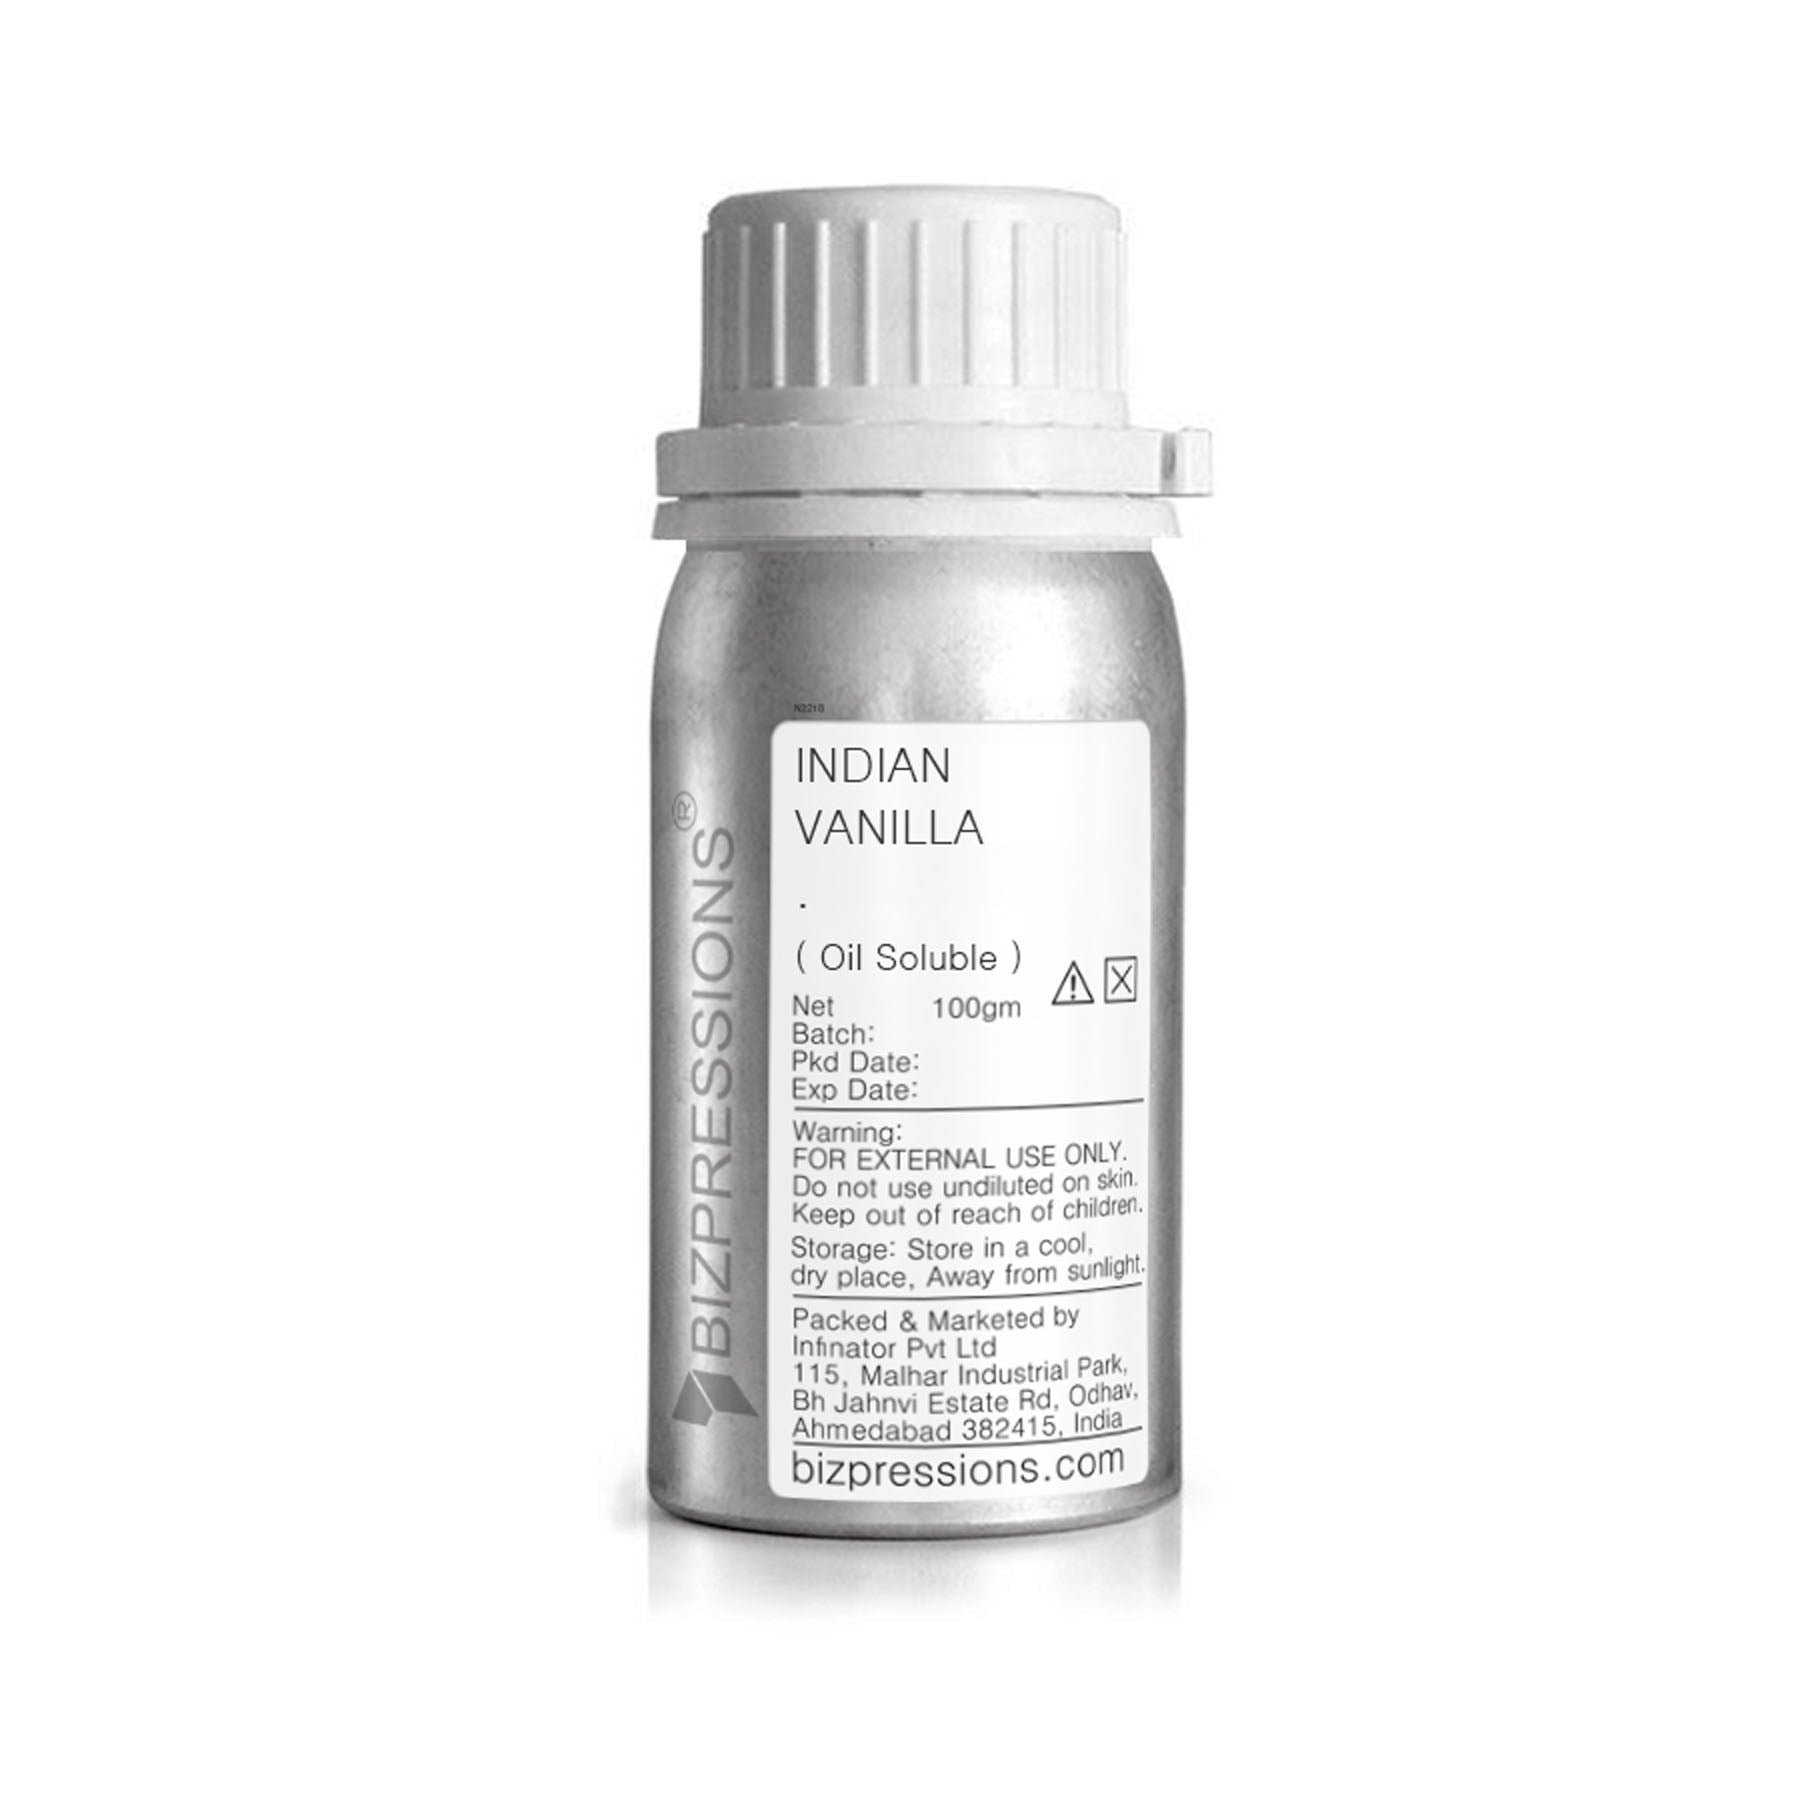 INDIAN VANILLA - Fragrance ( Oil Soluble ) - 100 gm